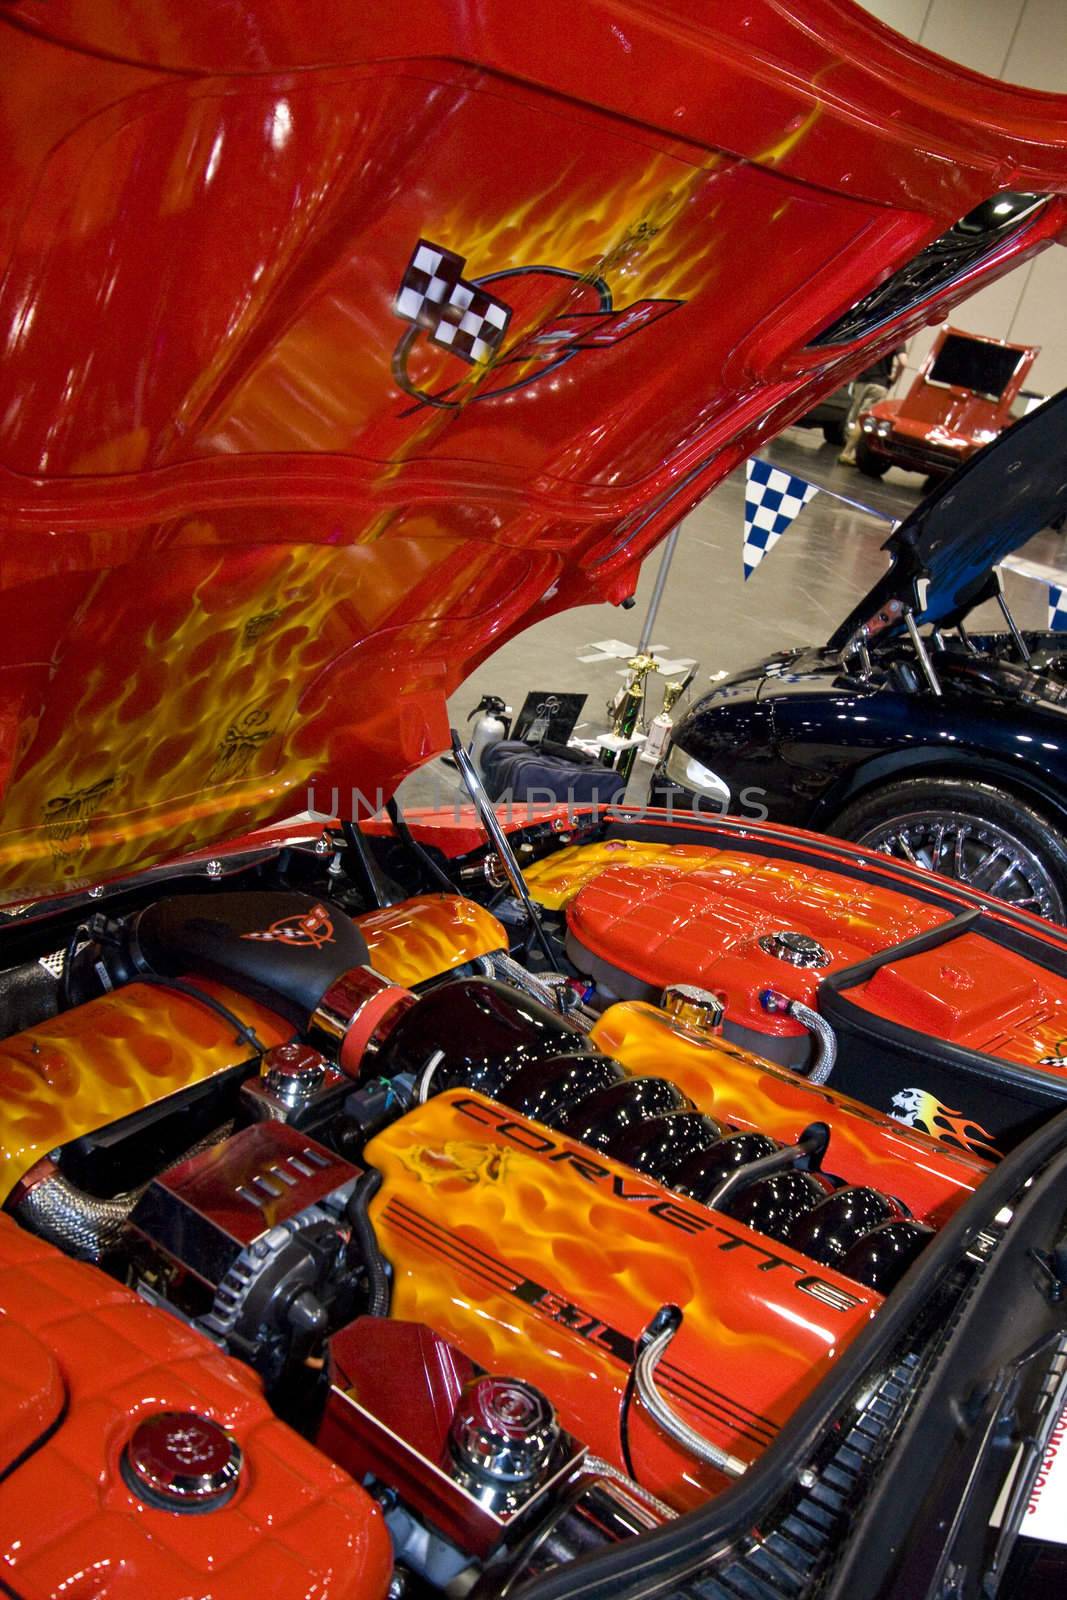 Corvettes at the 31st Annual Corvette / Chevy Expo
March 7 & 8, 2009
Houston George Brown Convention Center